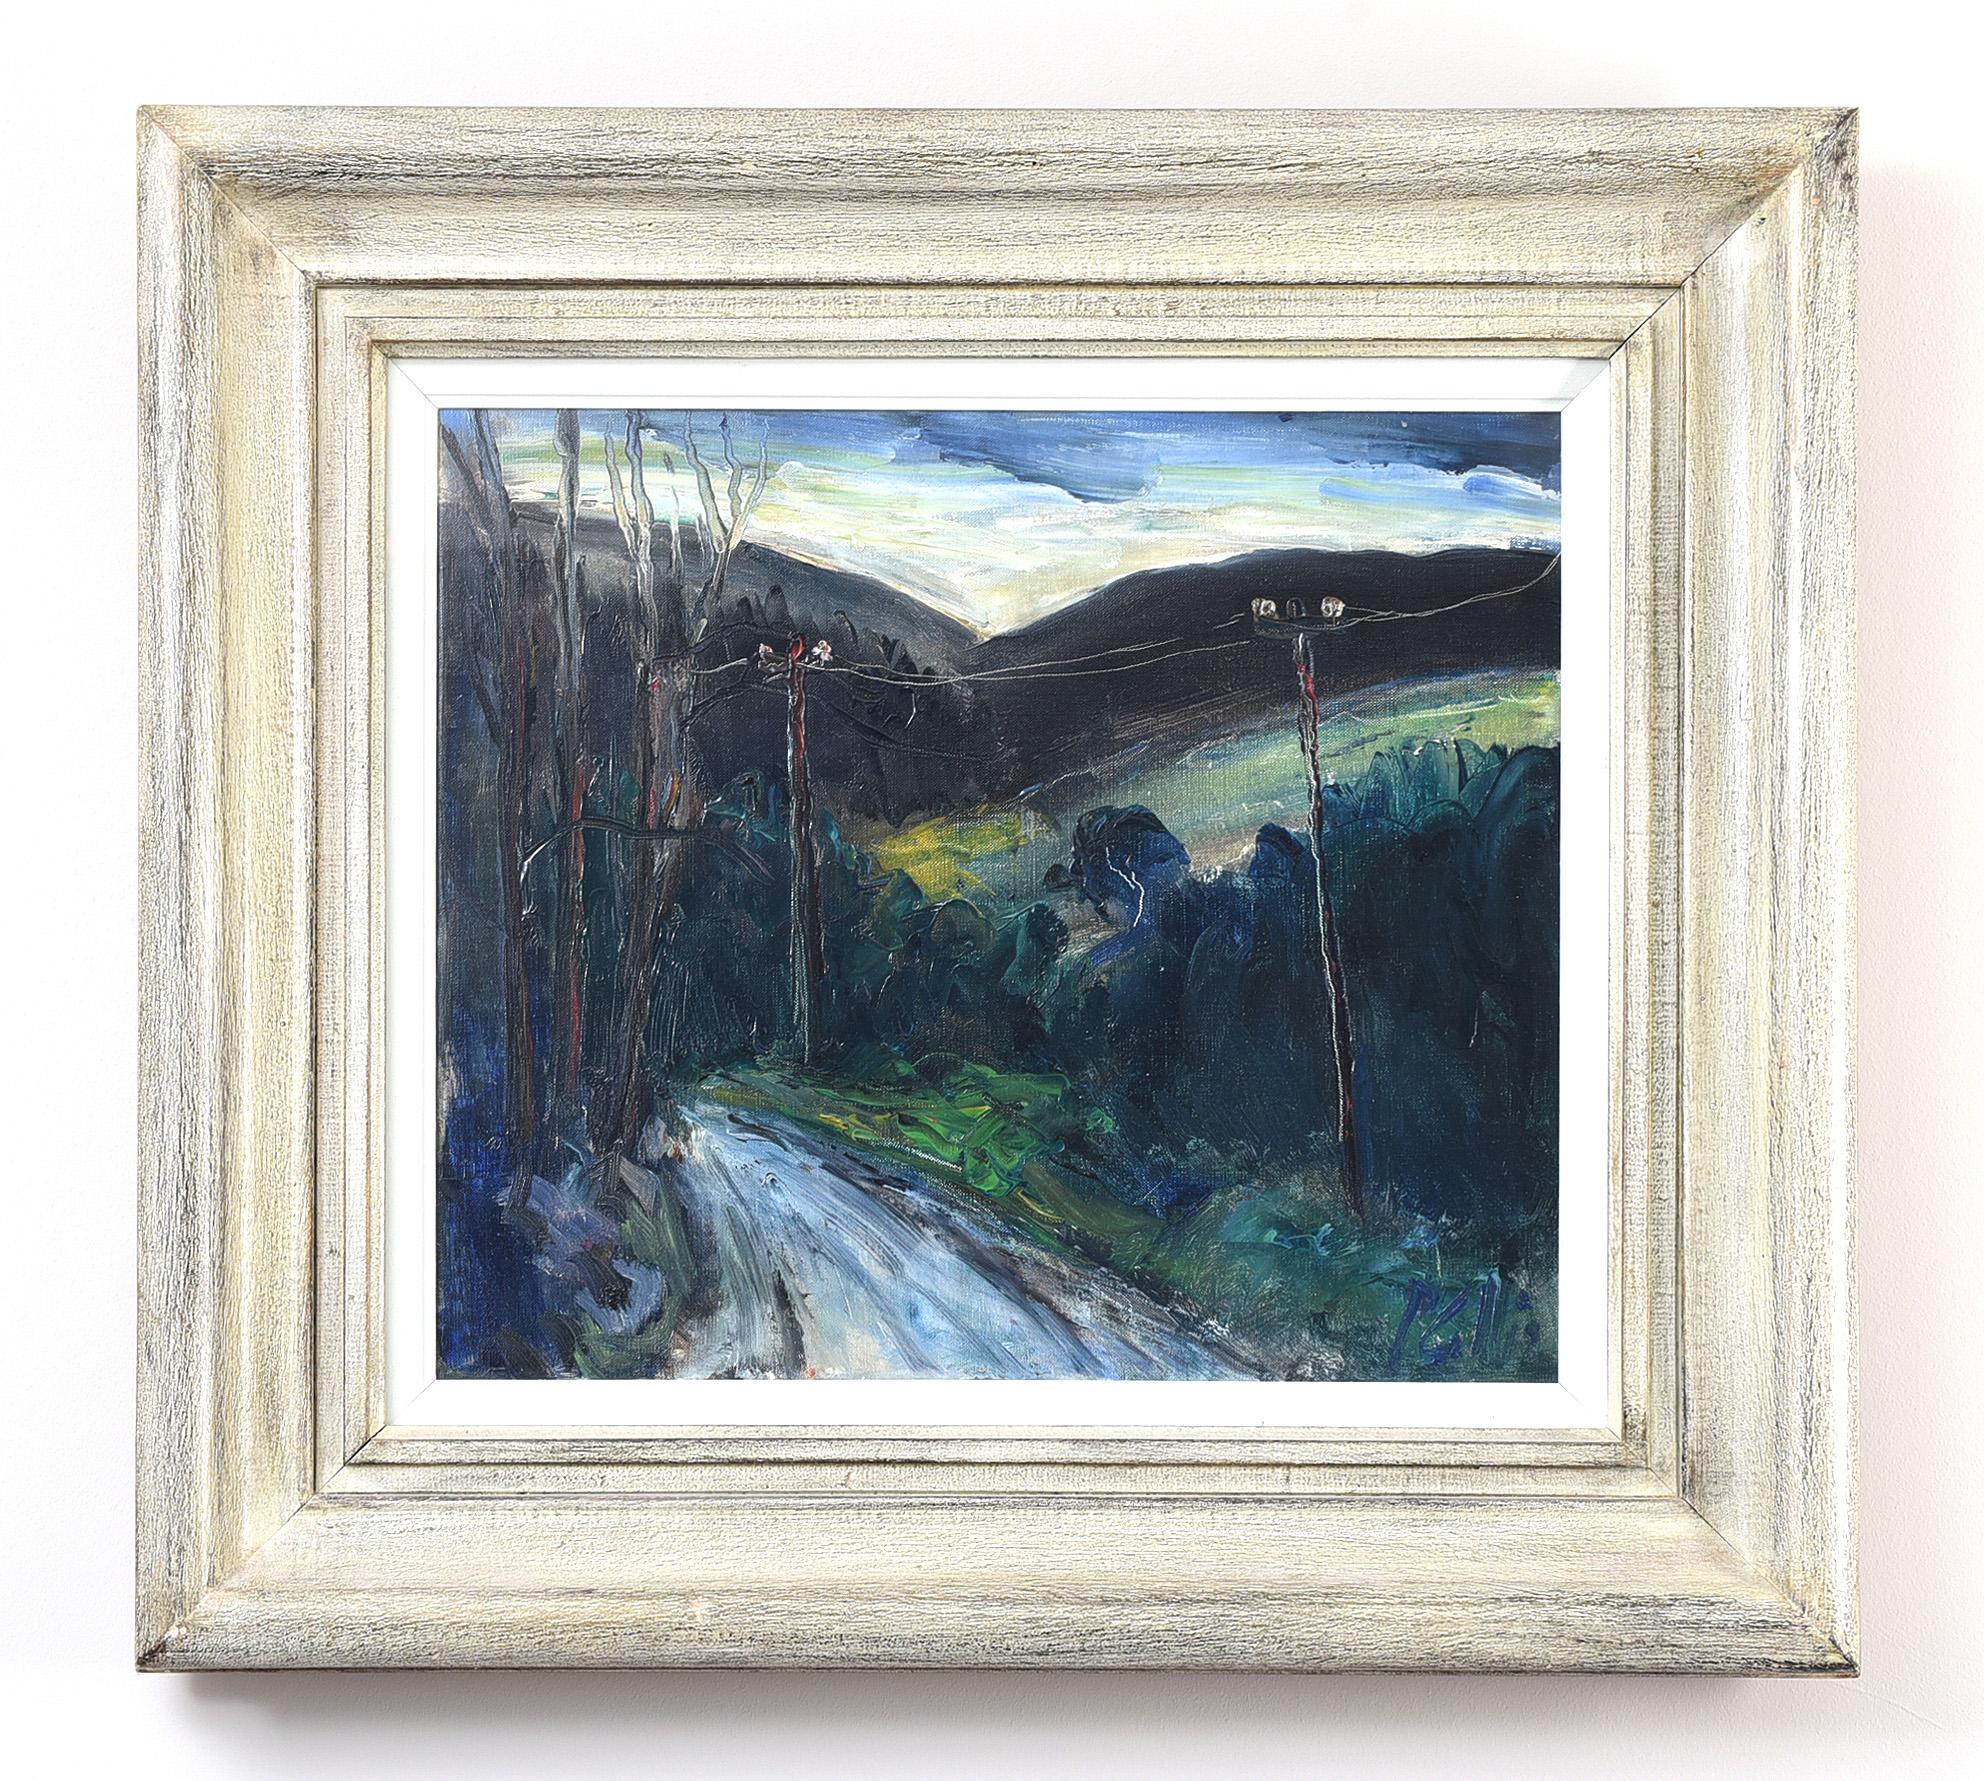 Oil on canvas
Signed
Framed
Measure: 13.5 x 15.5 inches (22 x 24 inches framed)

Peter Collis was born in 1929, London and was educated at Epsom College of Art, London, moving to Ireland in 1969. Desmond McAvock from The Irish Times in 1985 said,